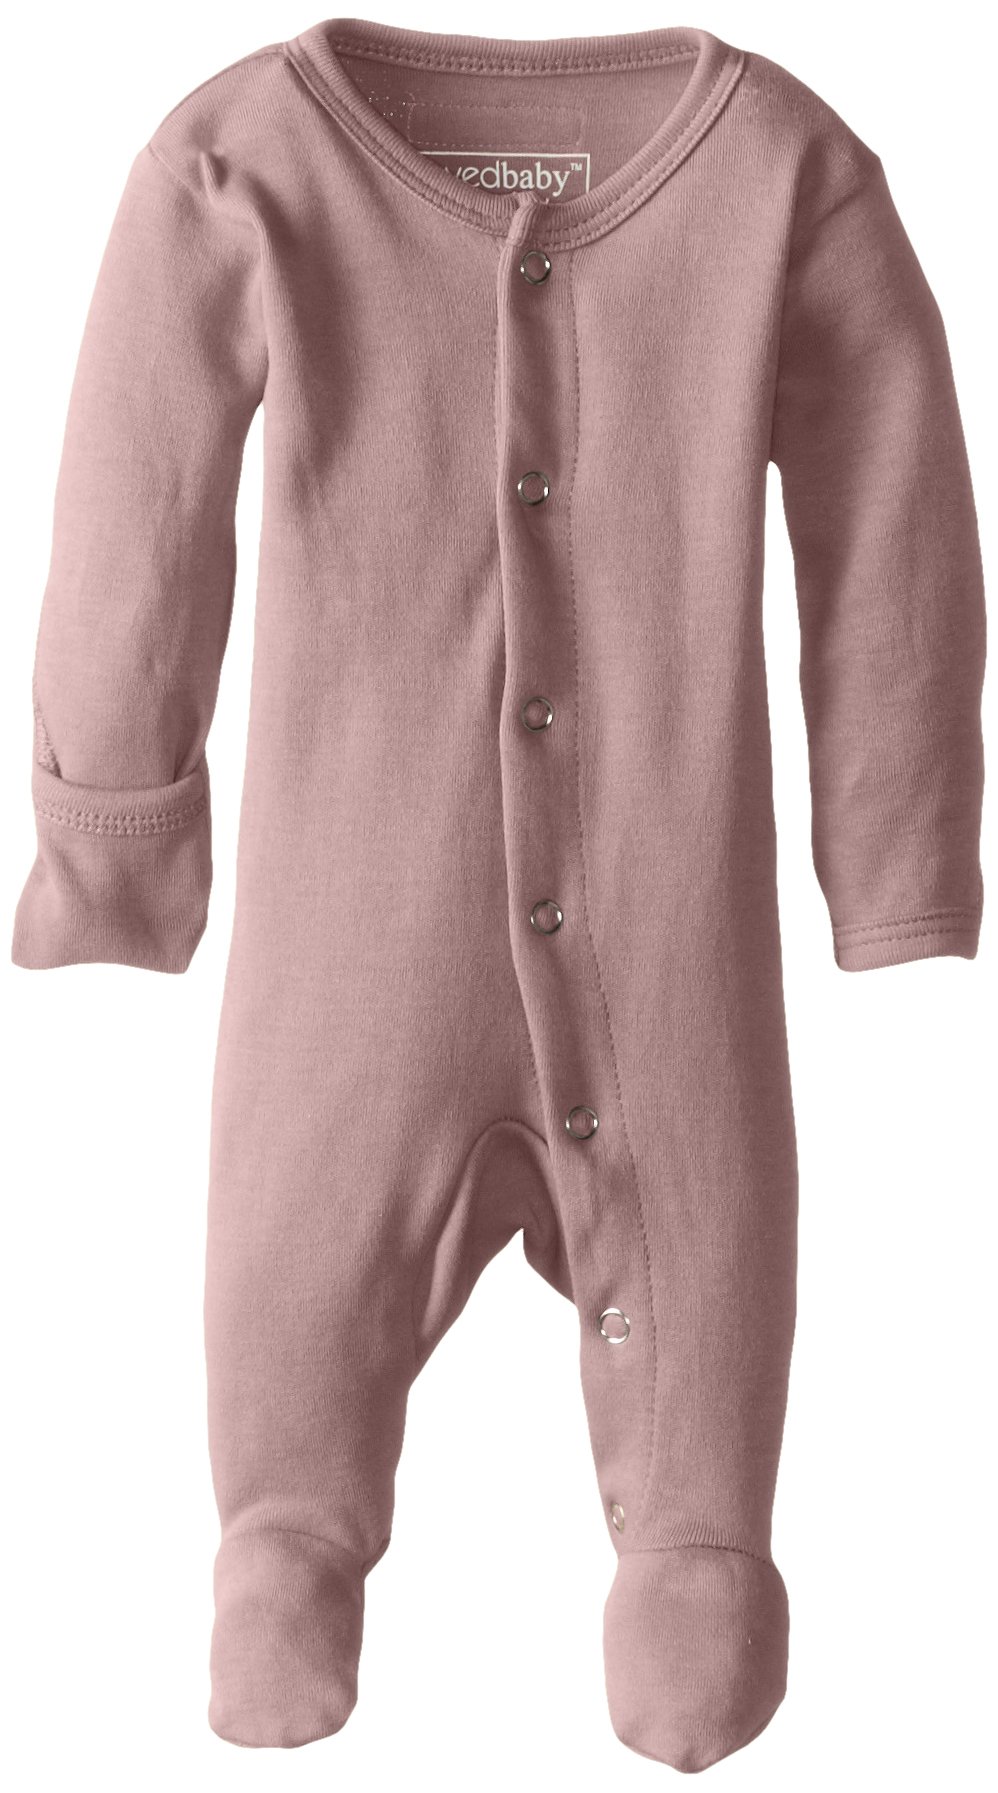 L'ovedbaby baby-girls Unisex-baby Organic Cotton Footed Overall